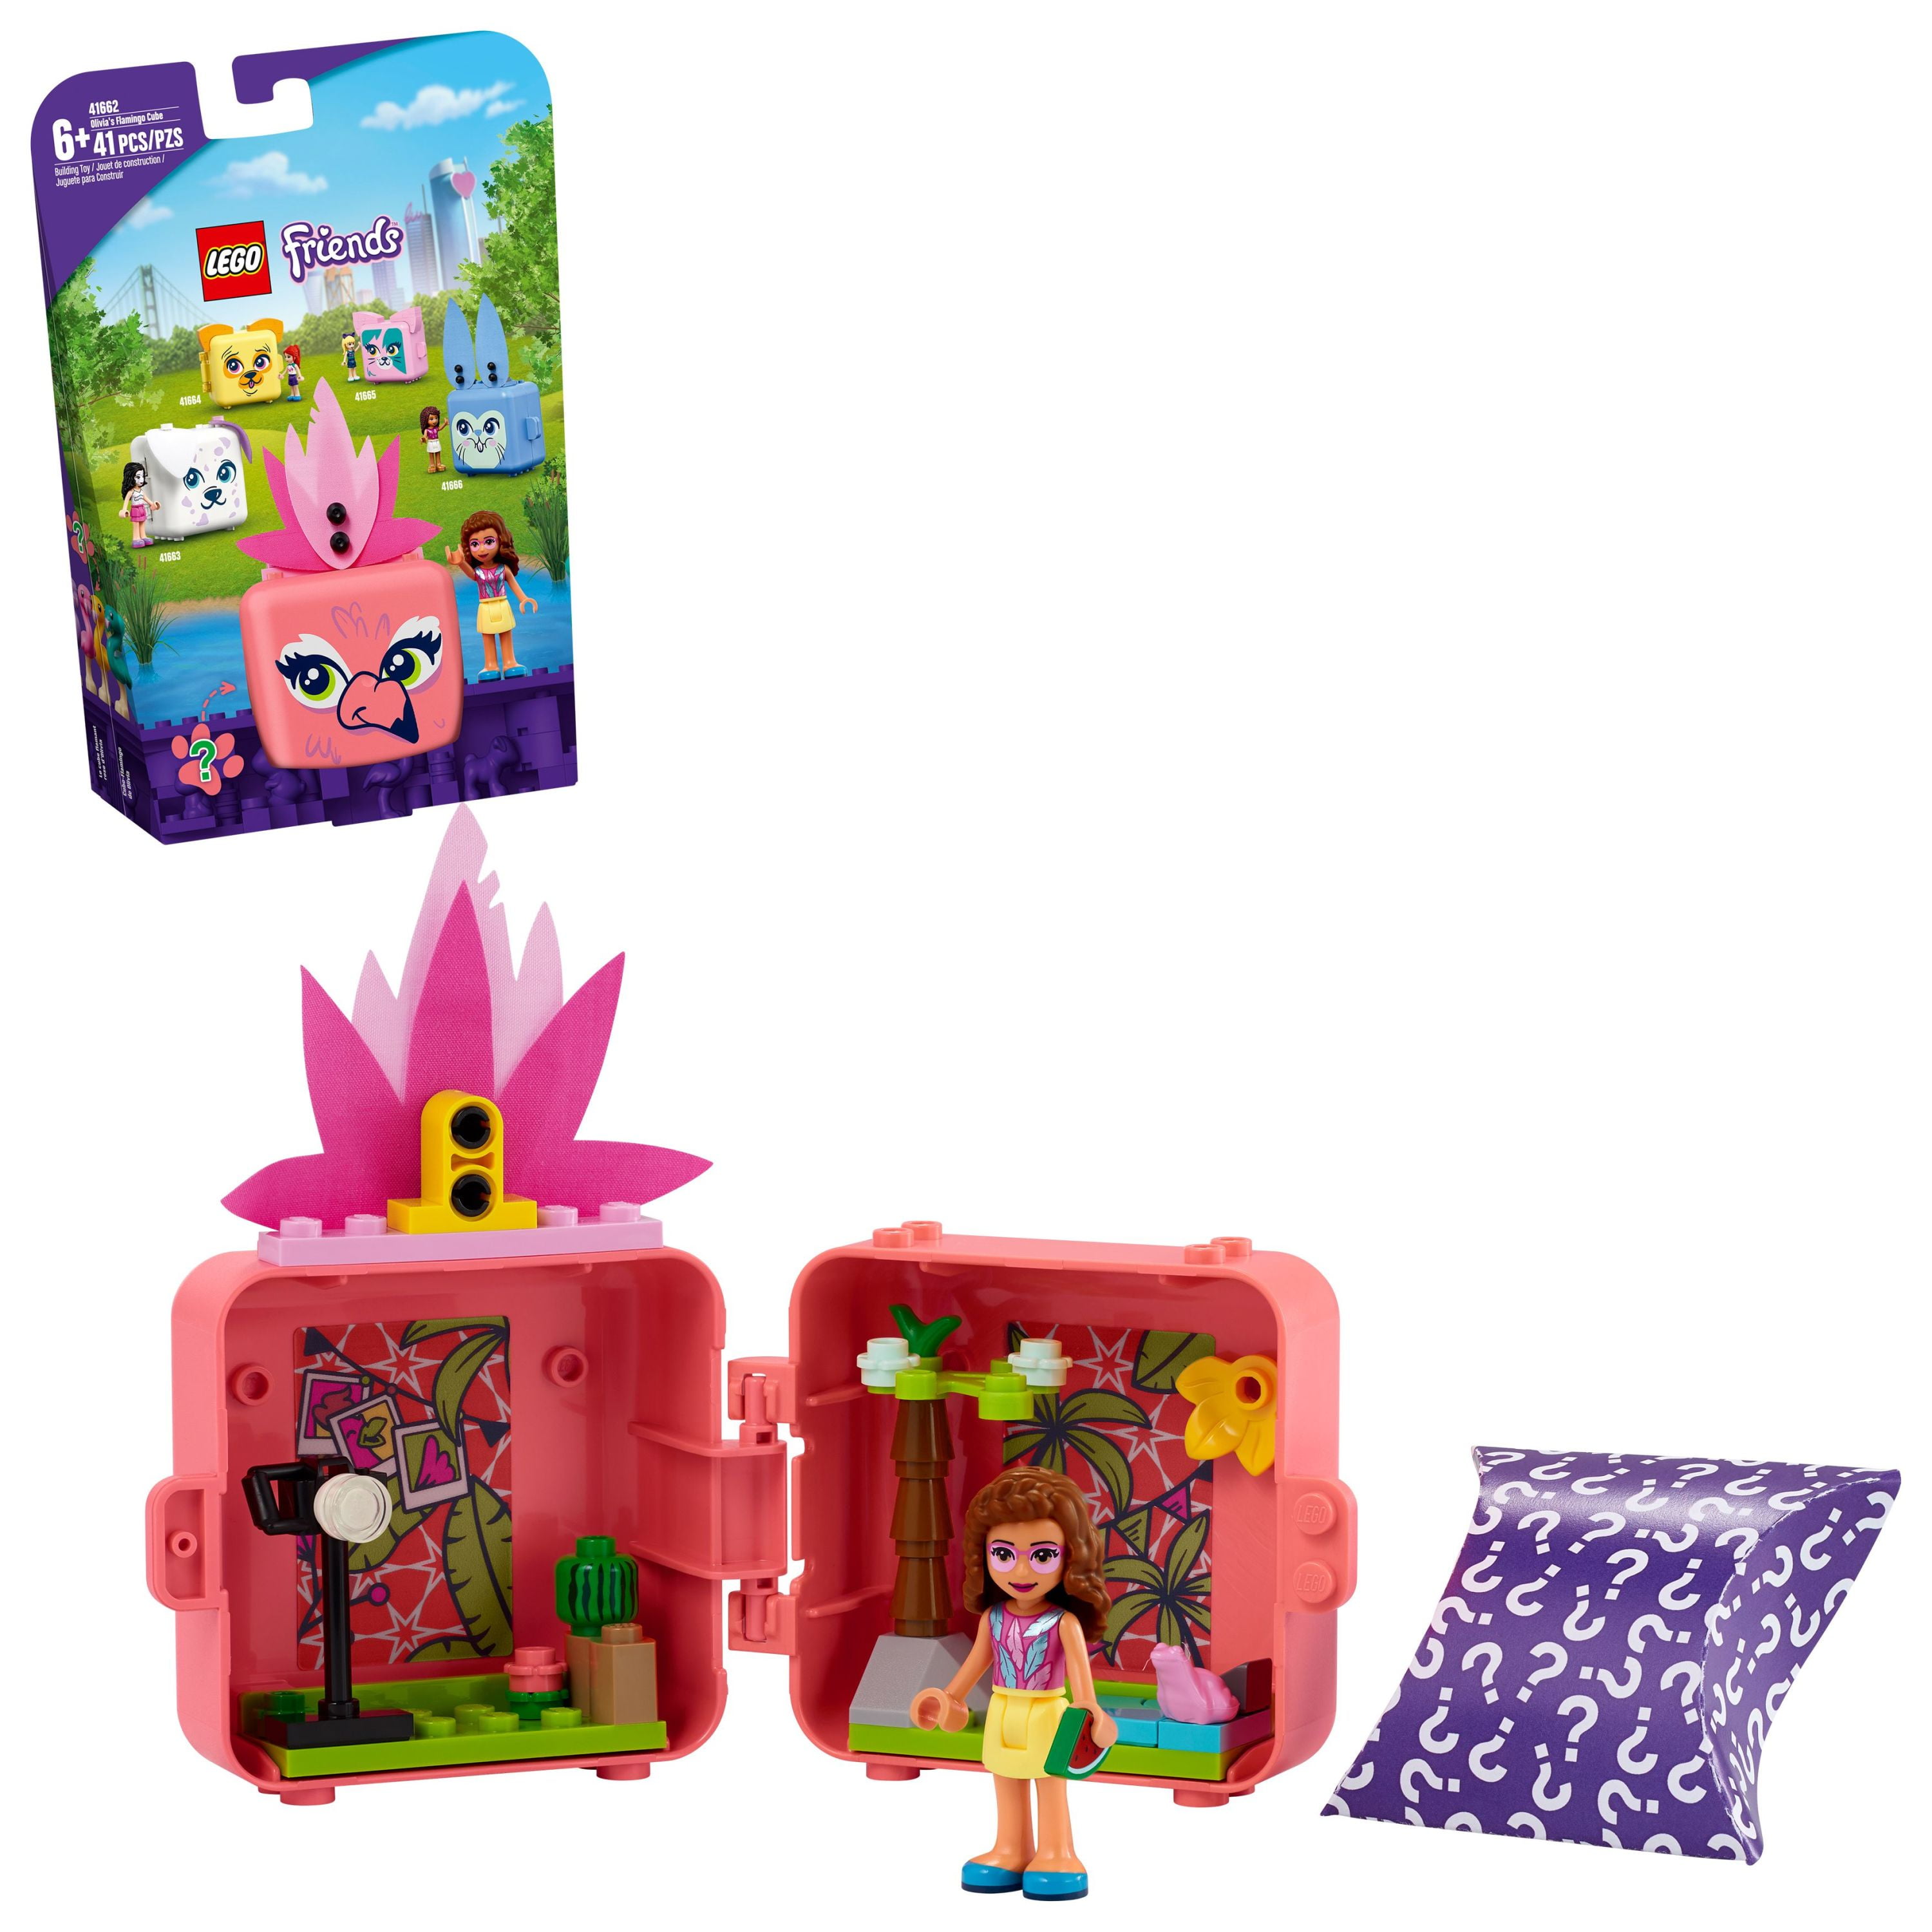 New 2020 Playset Includes Collectible Mini-Doll for Imaginative Play LEGO Friends Mia’s Play Cube 41403 Building Kit 40 Pieces